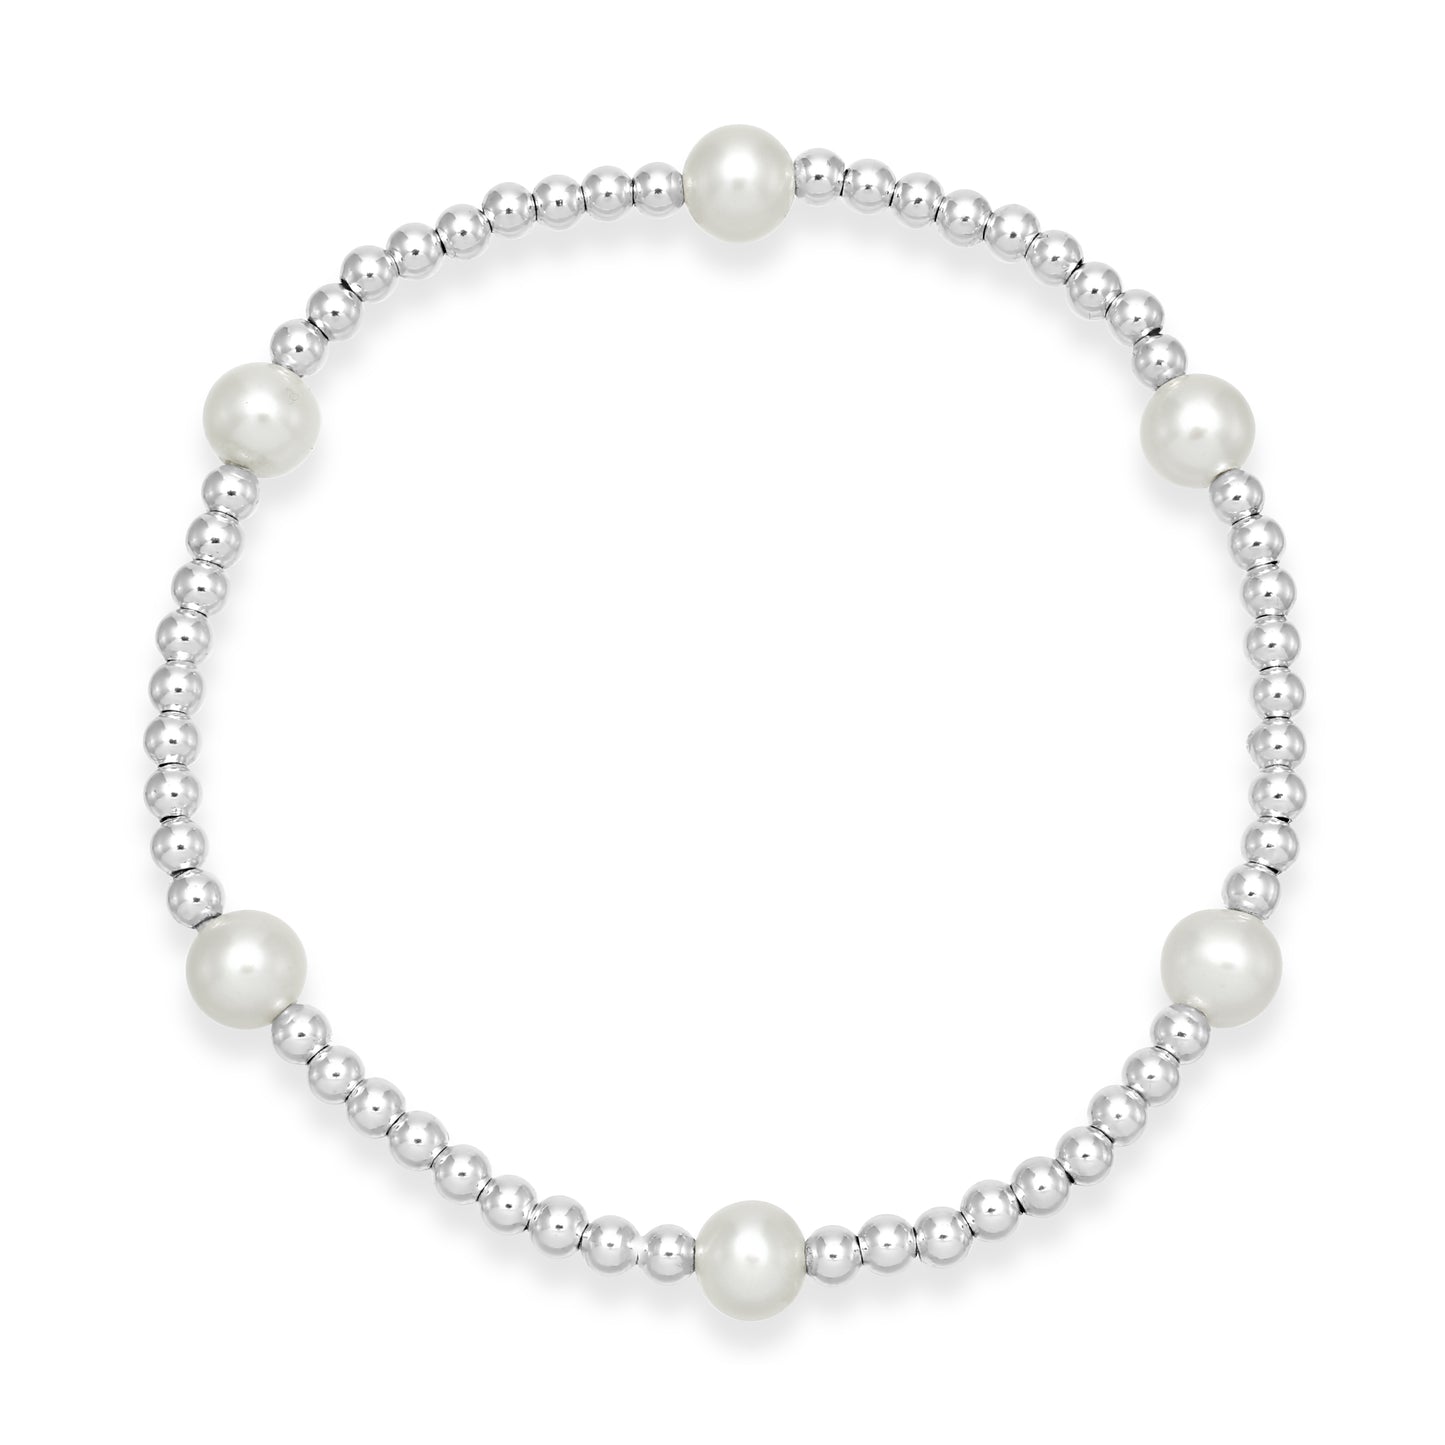 Credo Silver Bracelet With Cultured Freshwater Pearls